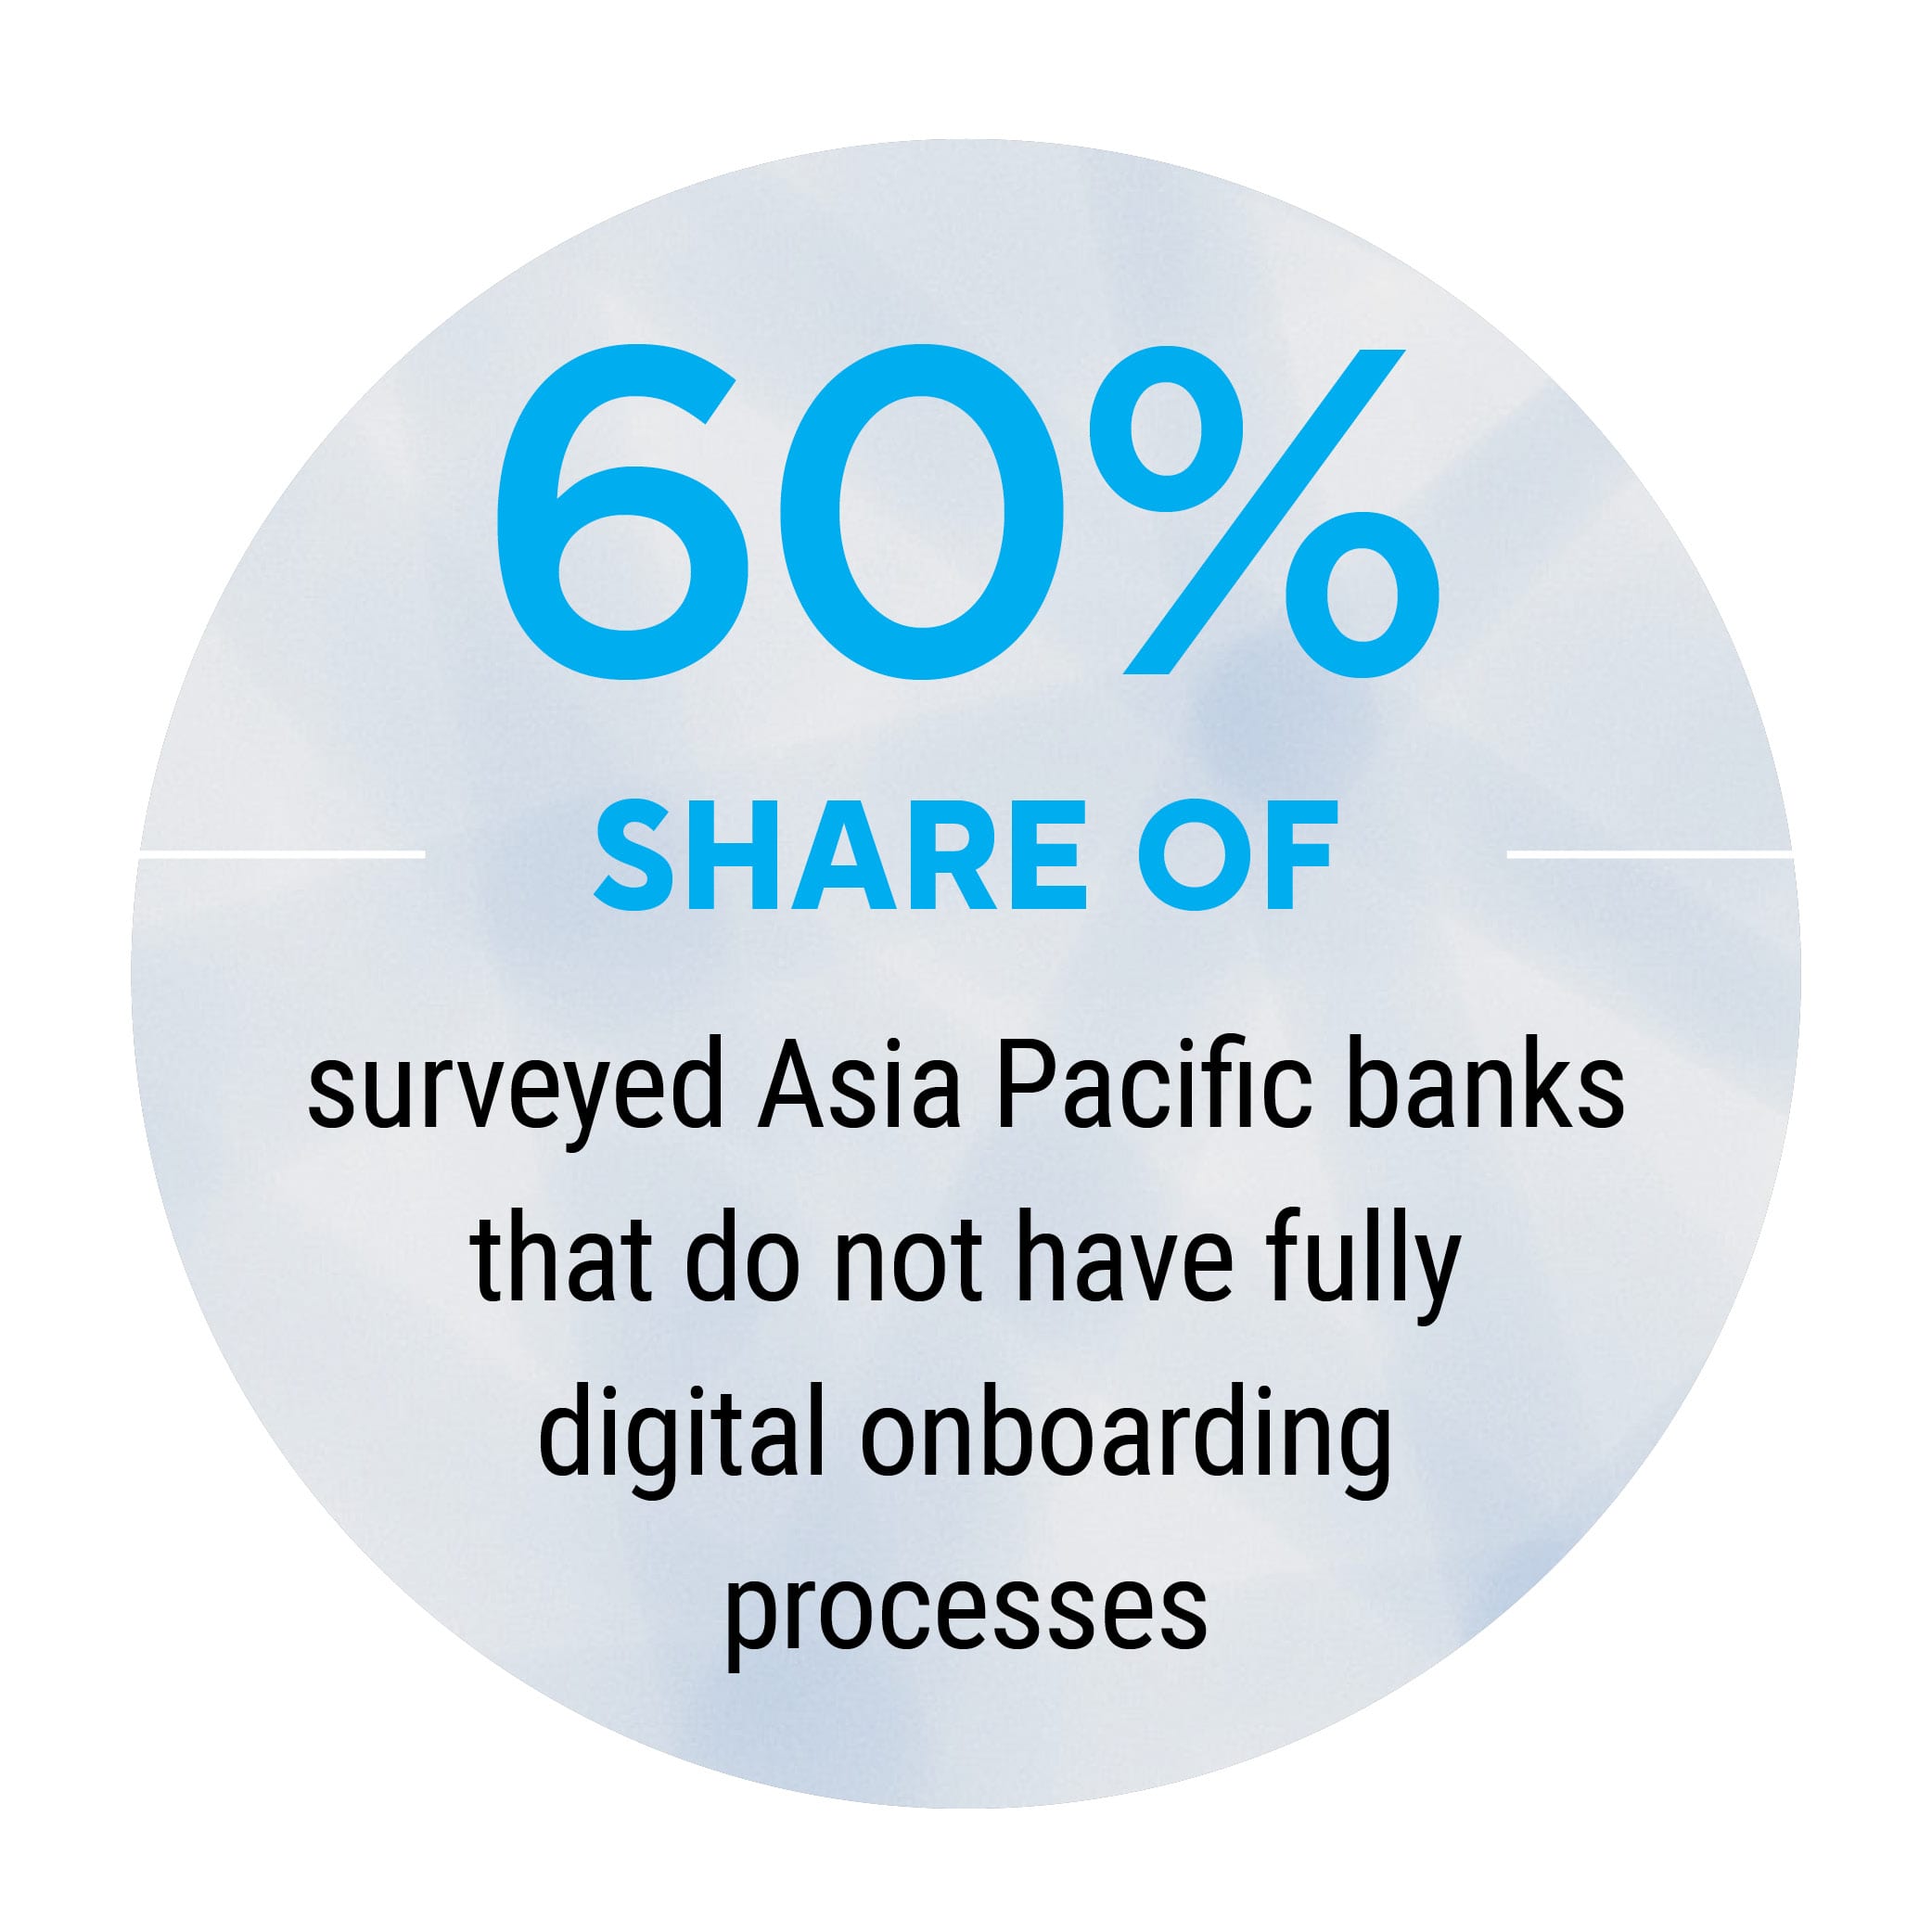 60%: Share of surveyed Asia Pacific banks that do not have fully digital onboarding processes